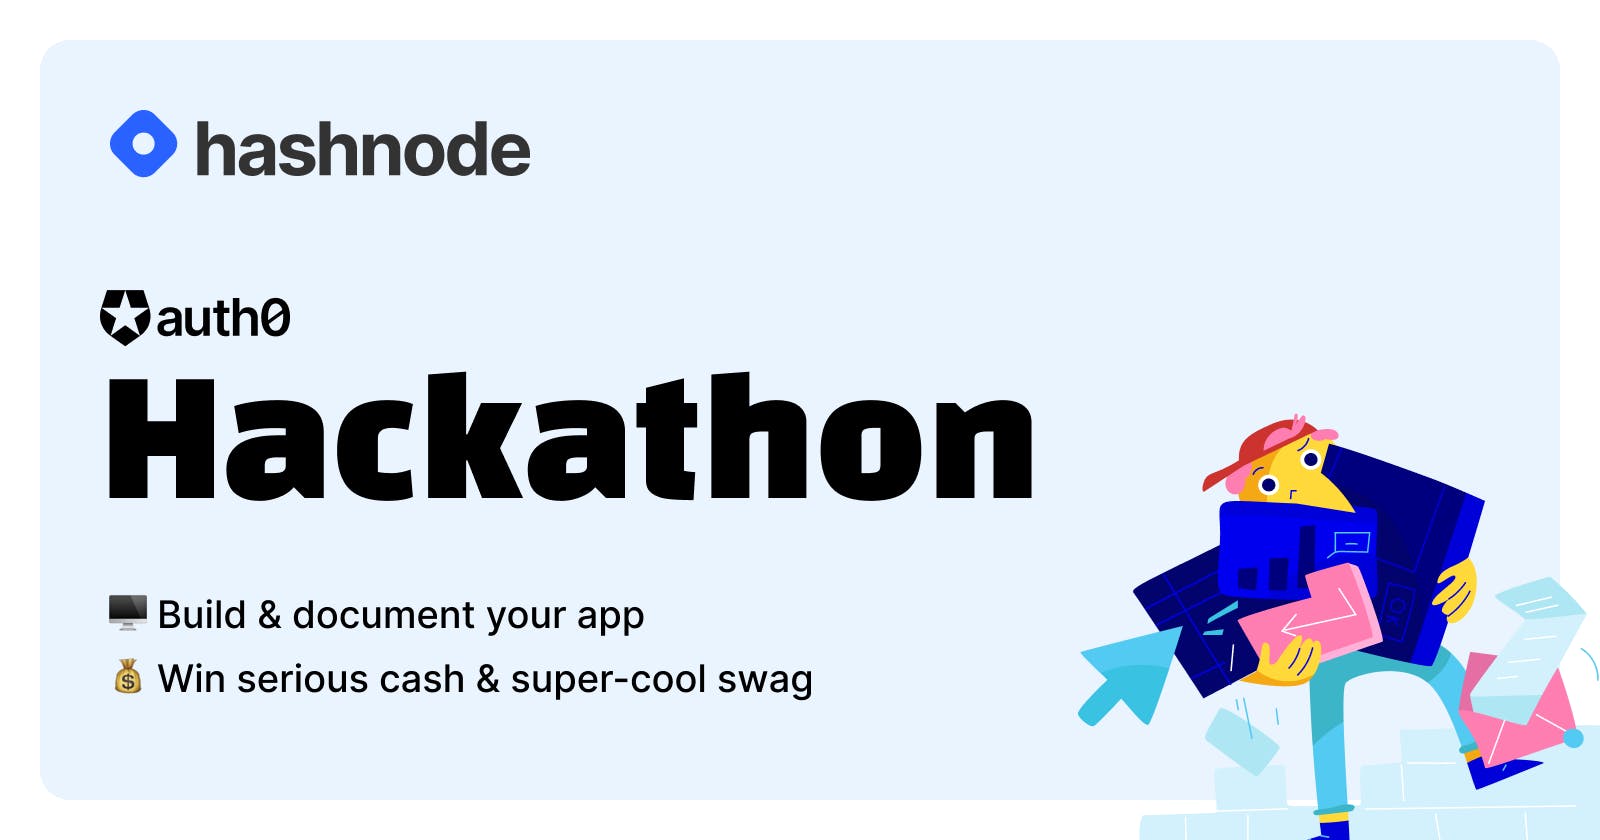 August Heats Up With the Auth0 x Hashnode Hackathon!